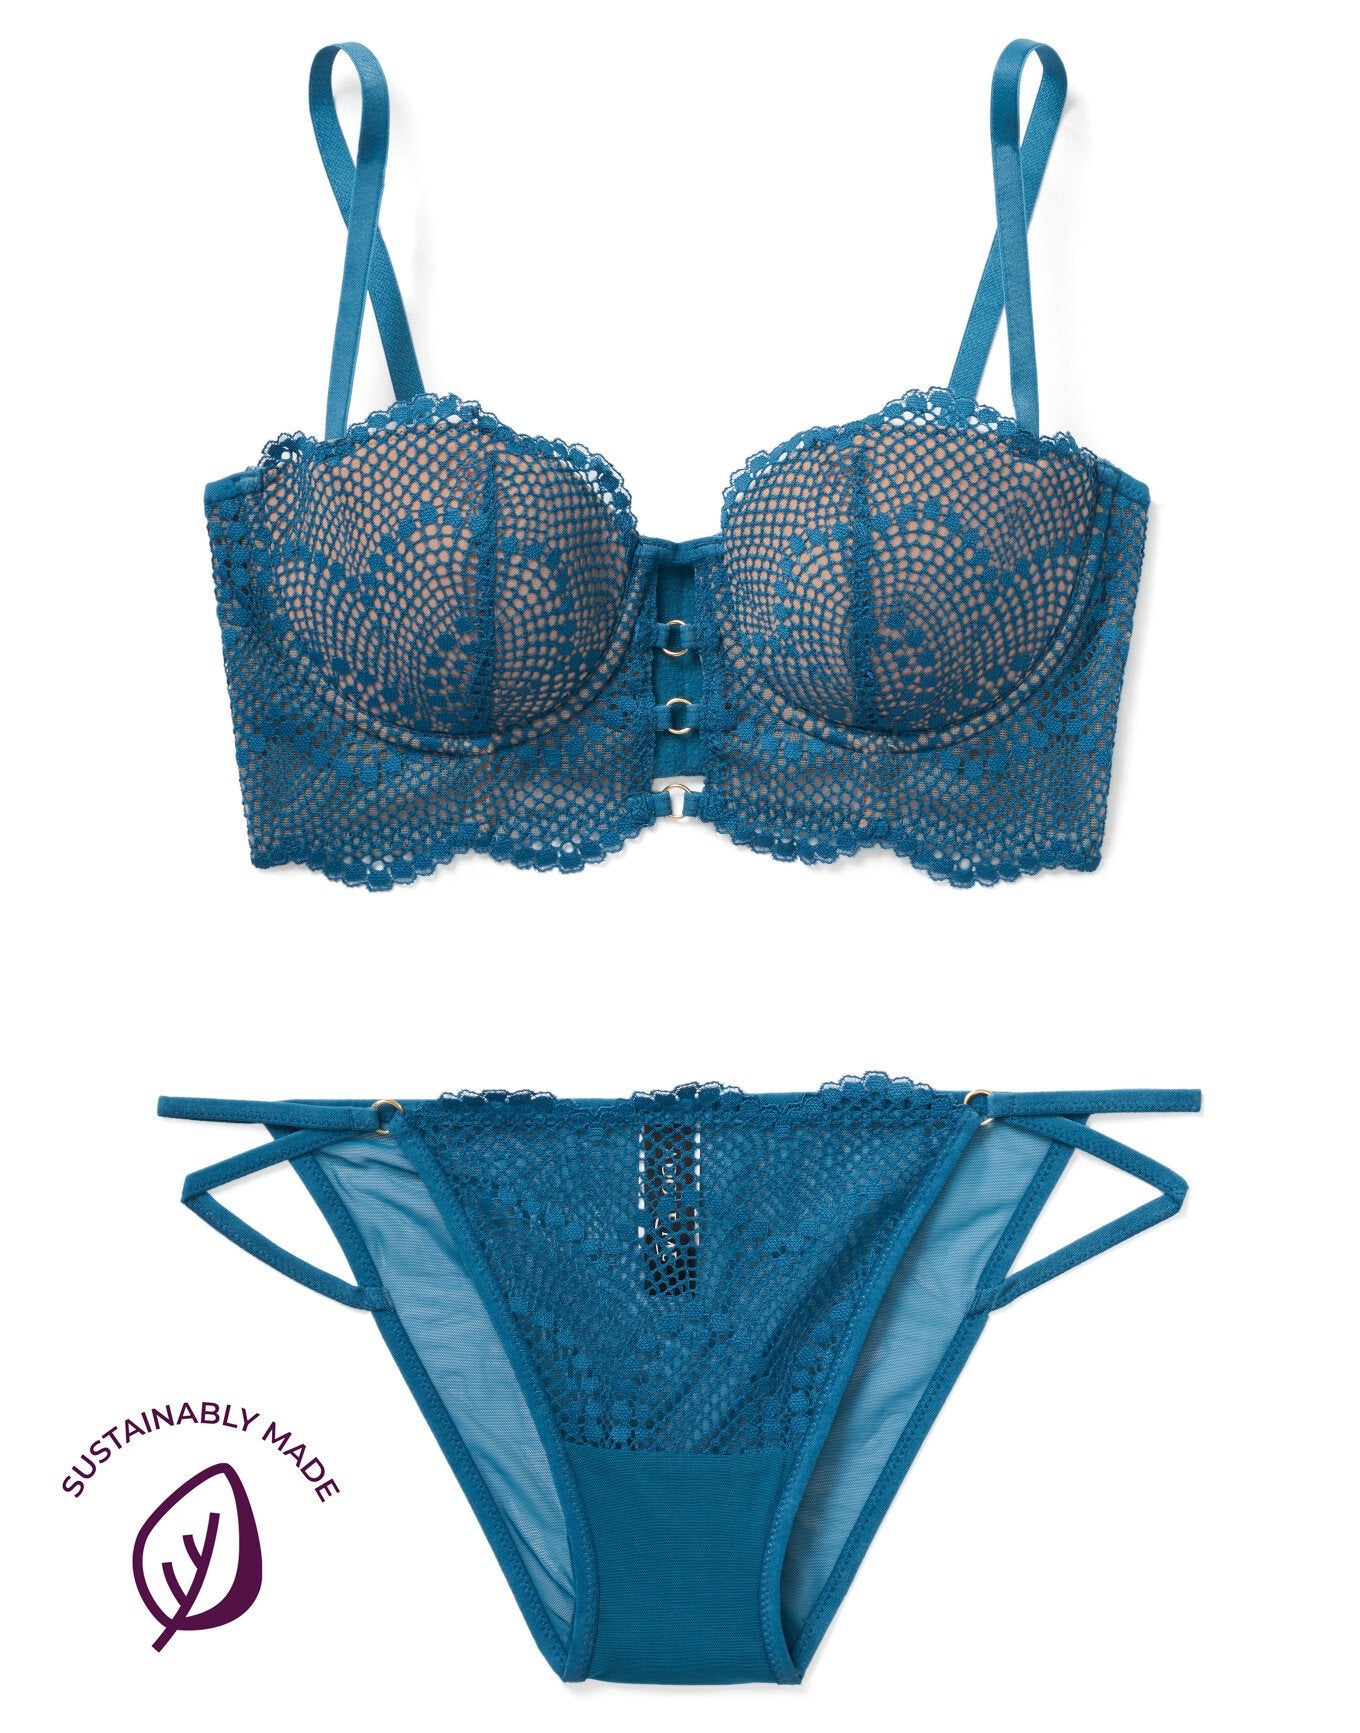 Adore Me Margaritte Push-Up Balconette in color Blue Sapphire and shape balconette